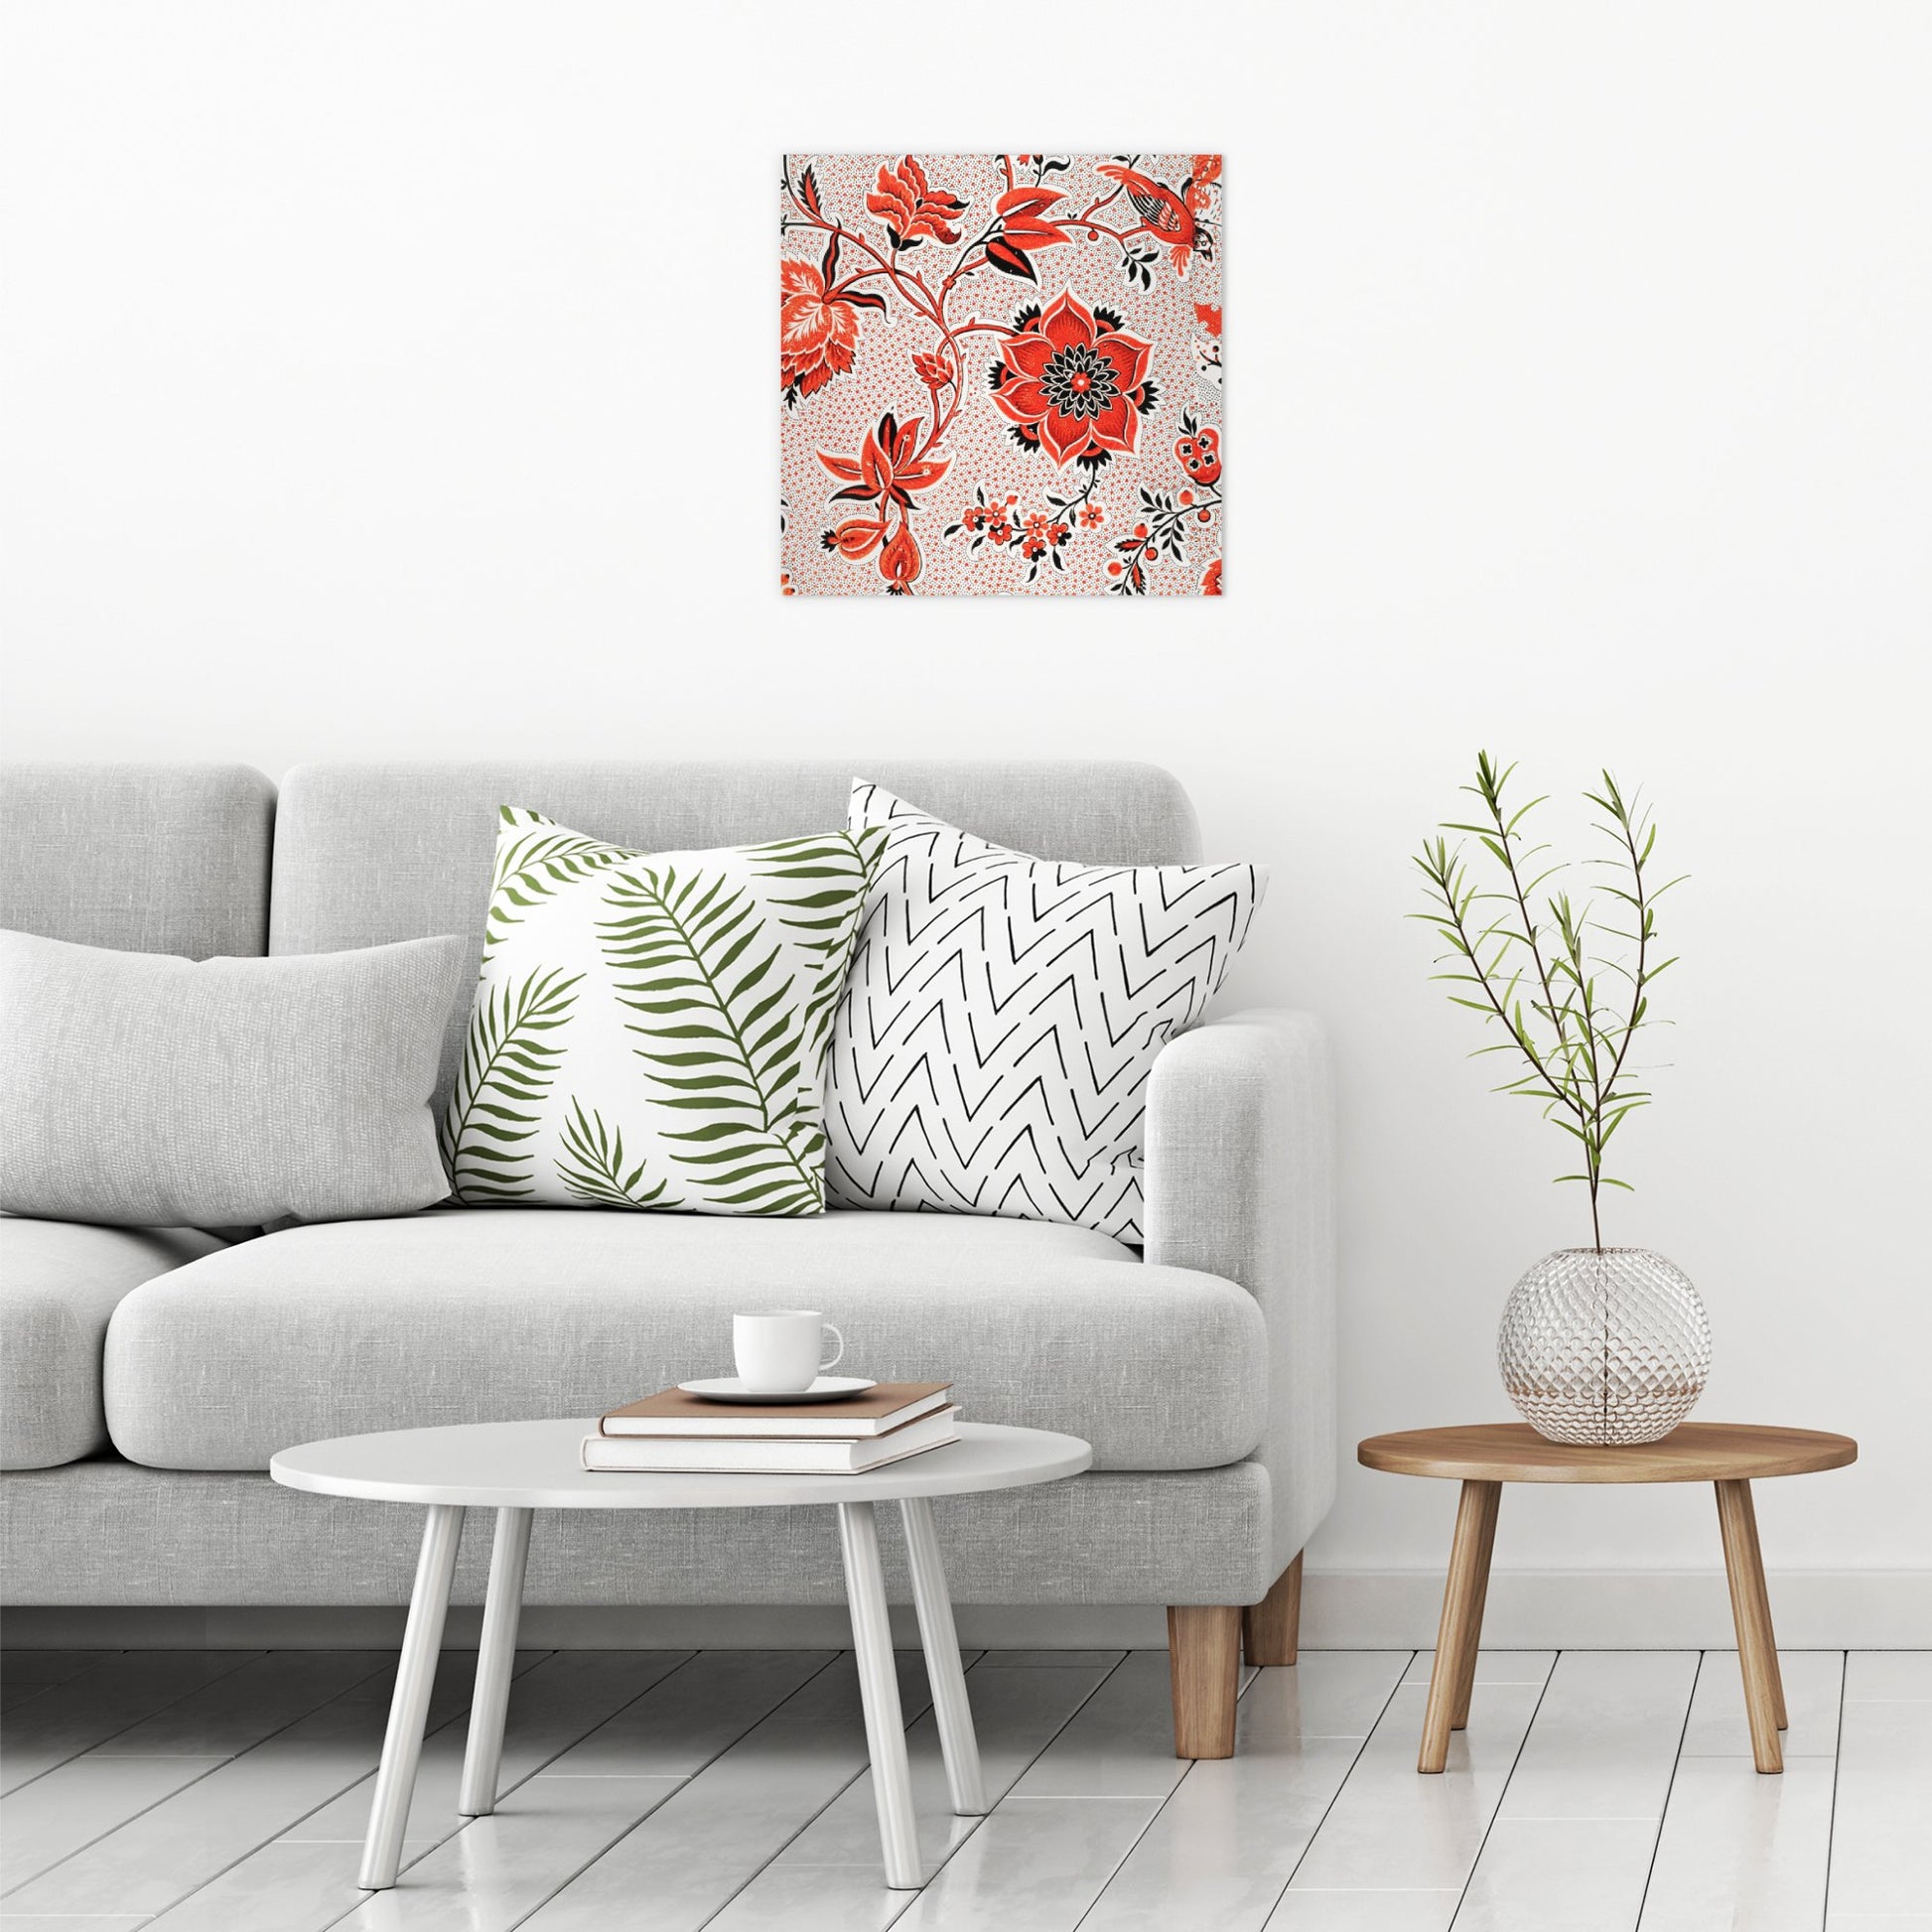 A contemporary modern room view showing a large size metal art poster display plate with printed design of a Vintage Red Floral Wallpaper Pattern